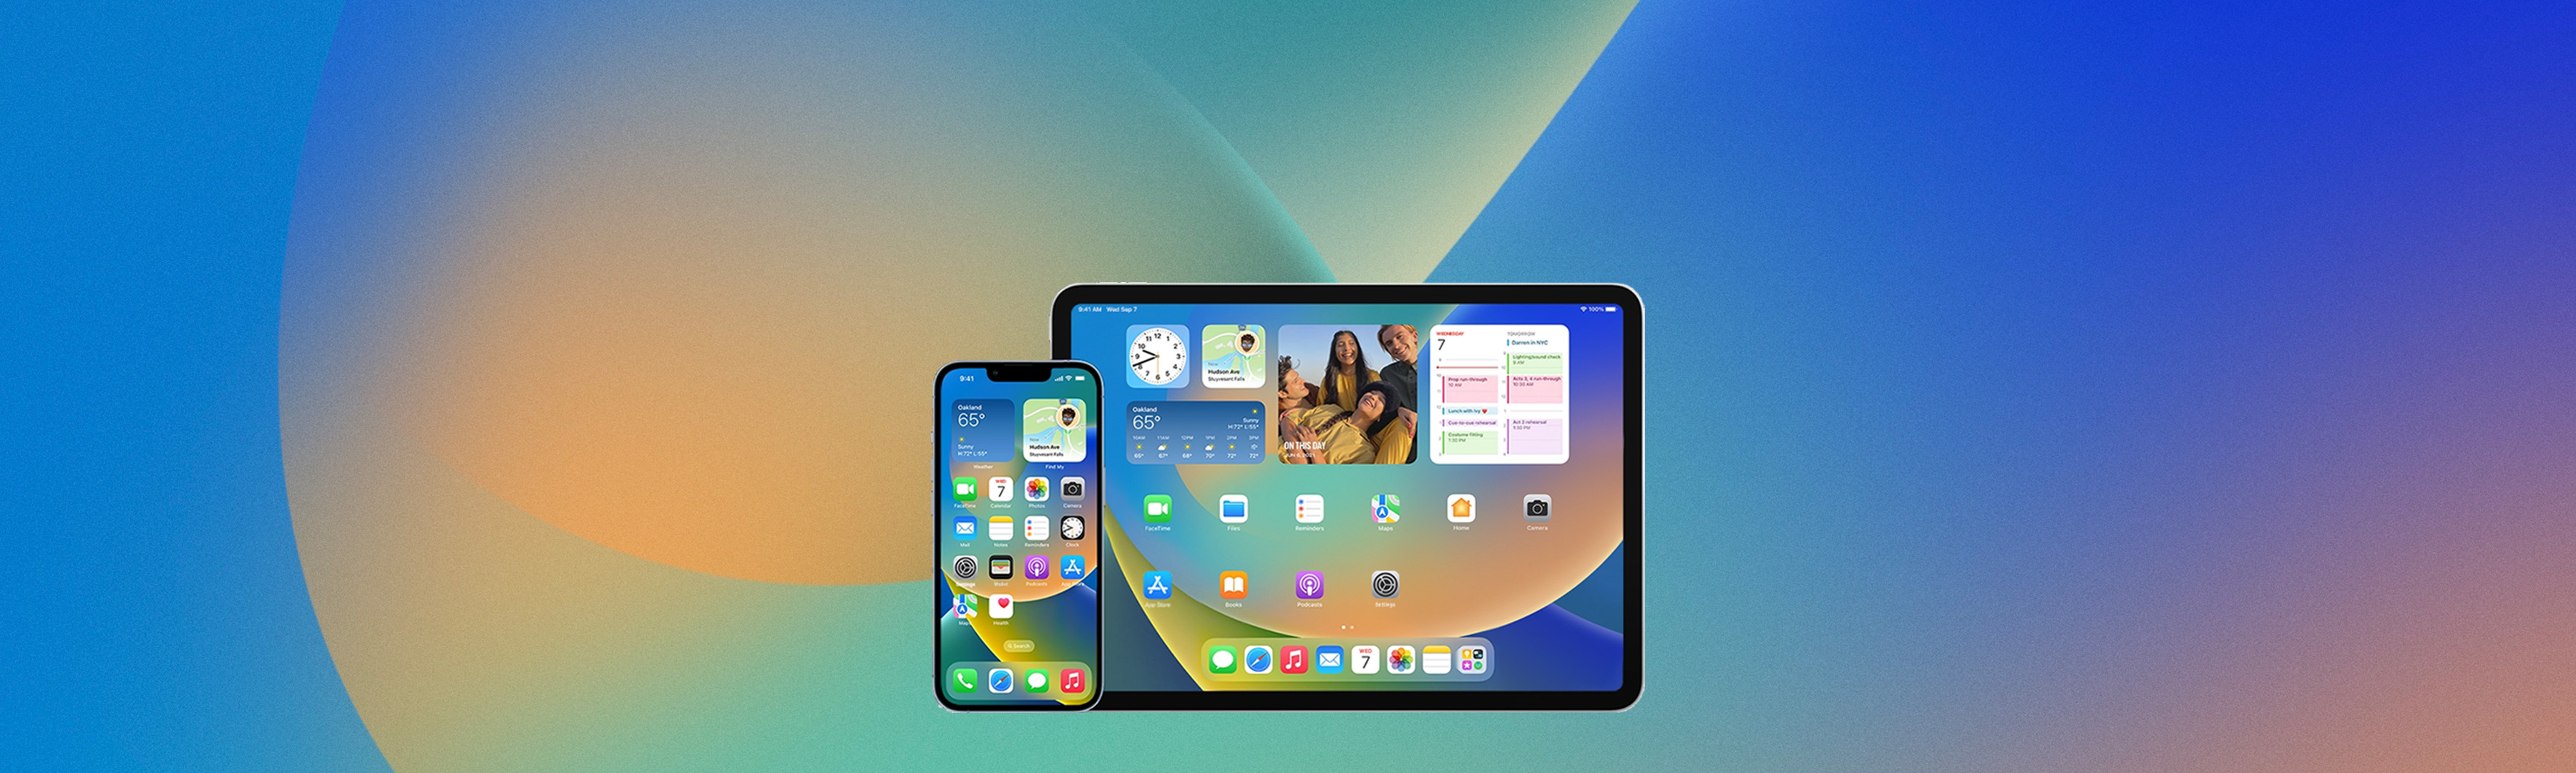 How to update to iOS 16 or iPadOS 16 – Official Apple Support